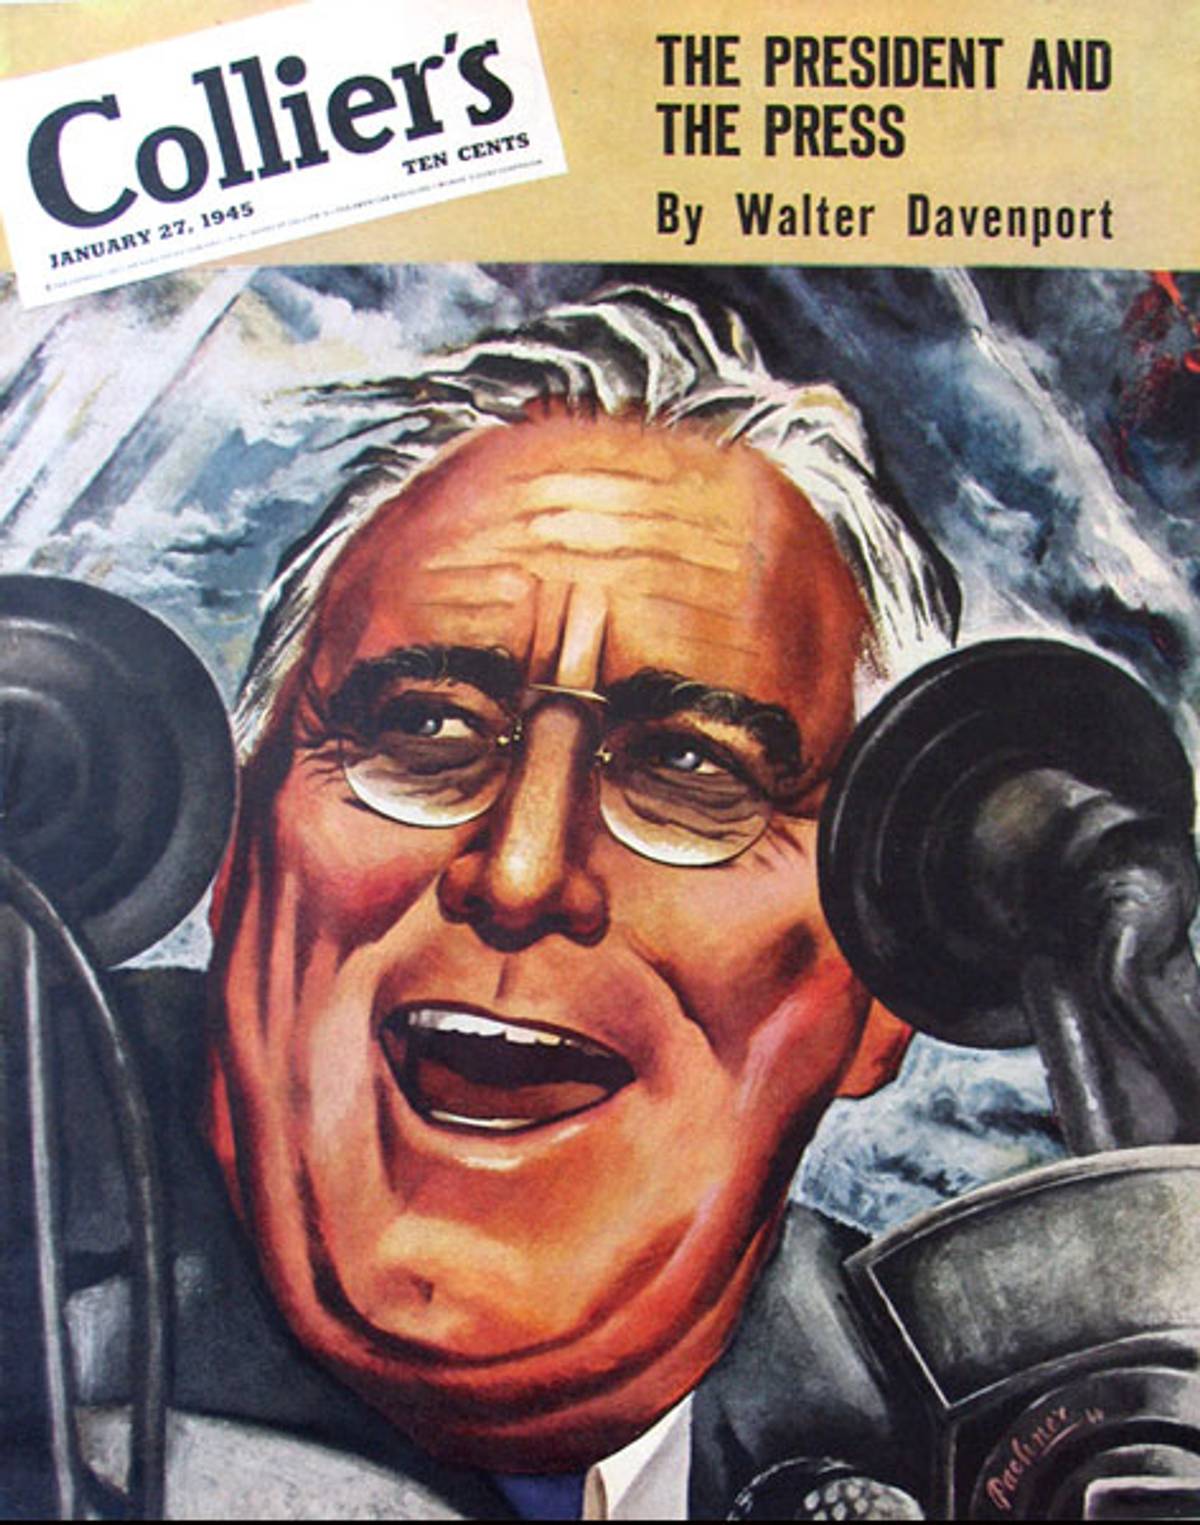 Pachner’s renowned illustration of President Roosevelt, which appeared on the cover of Collier’s in early 1945.